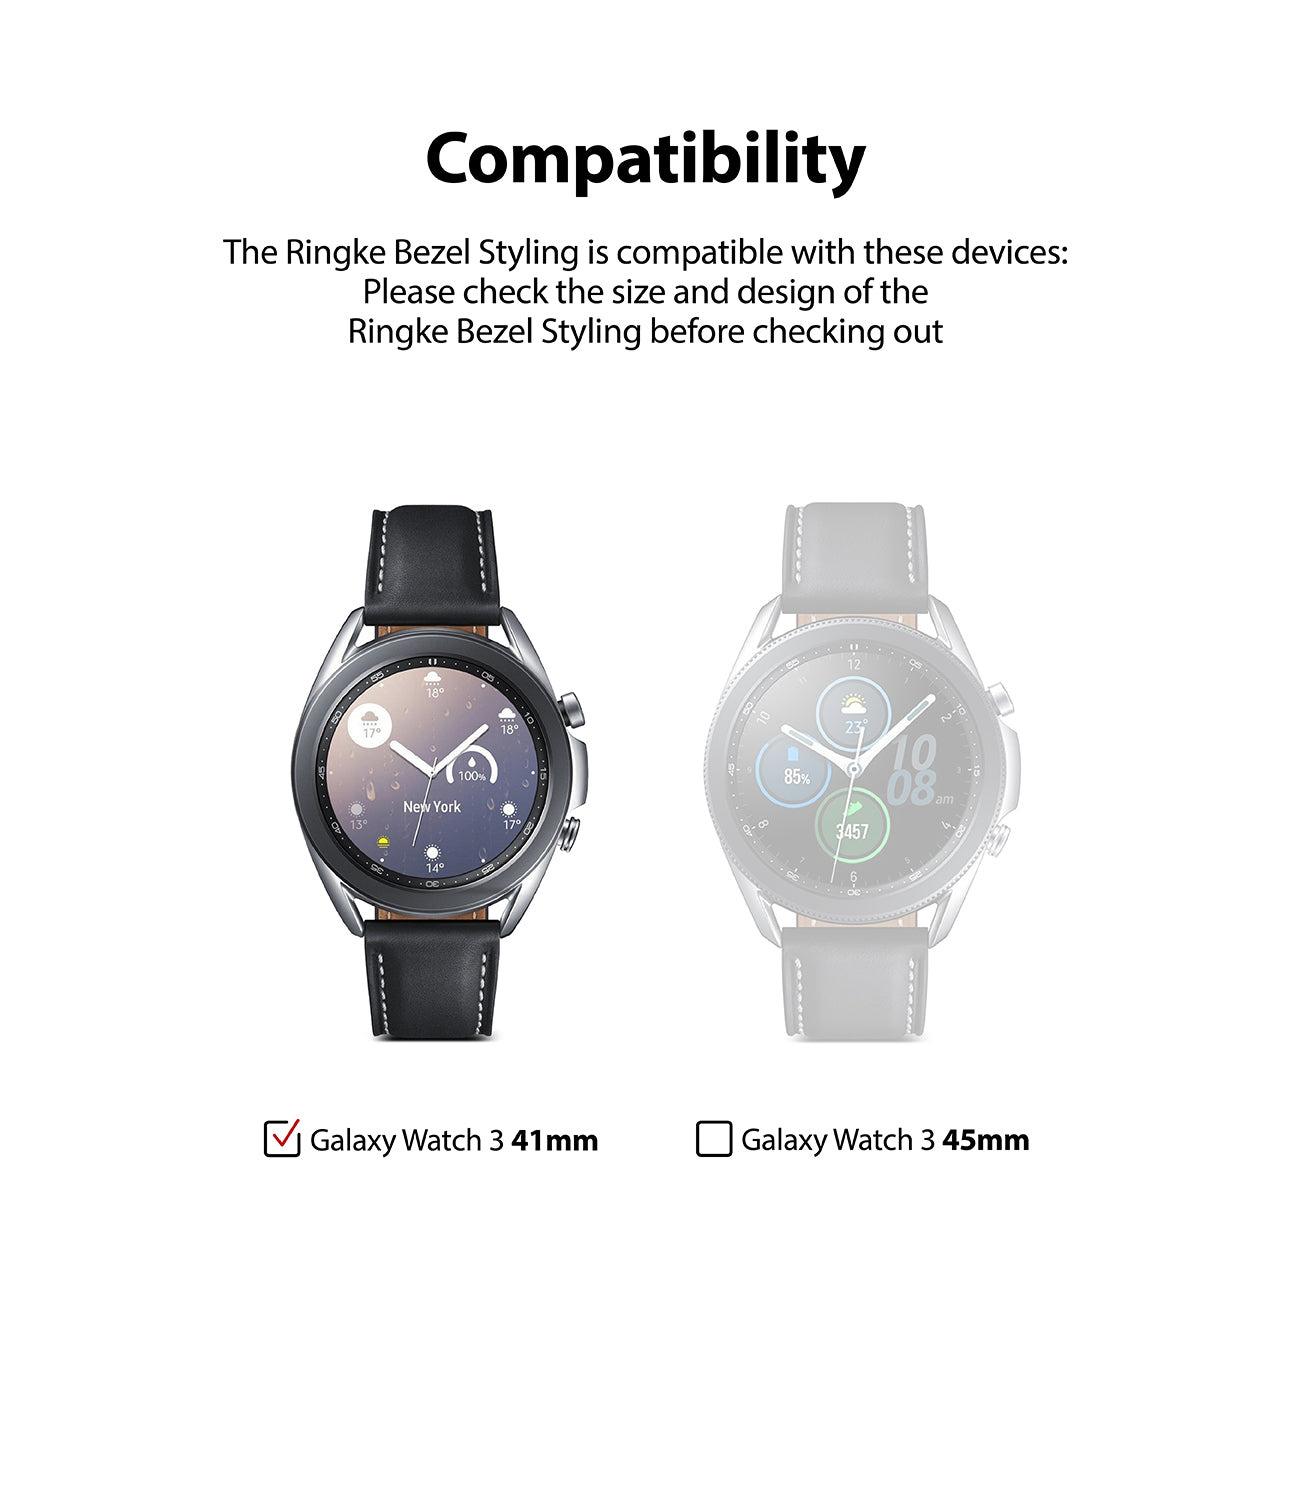 only compatible with galaxy watch 3 41mm